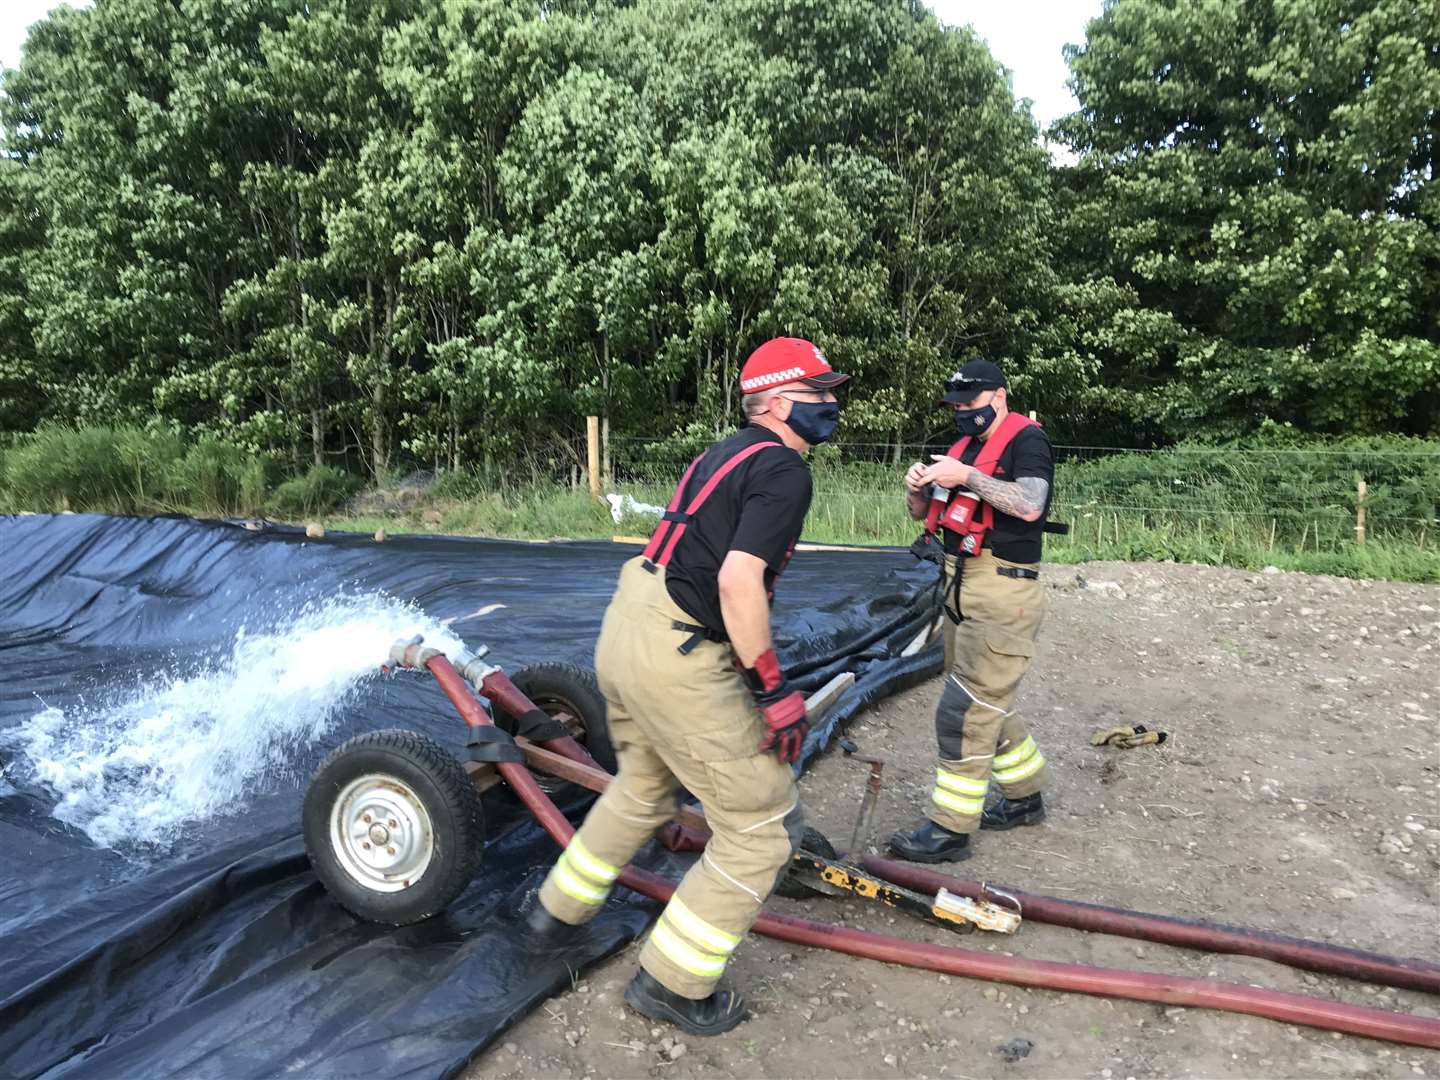 The Scottish Fire and Rescue Service used the opportunity as a training exercise.